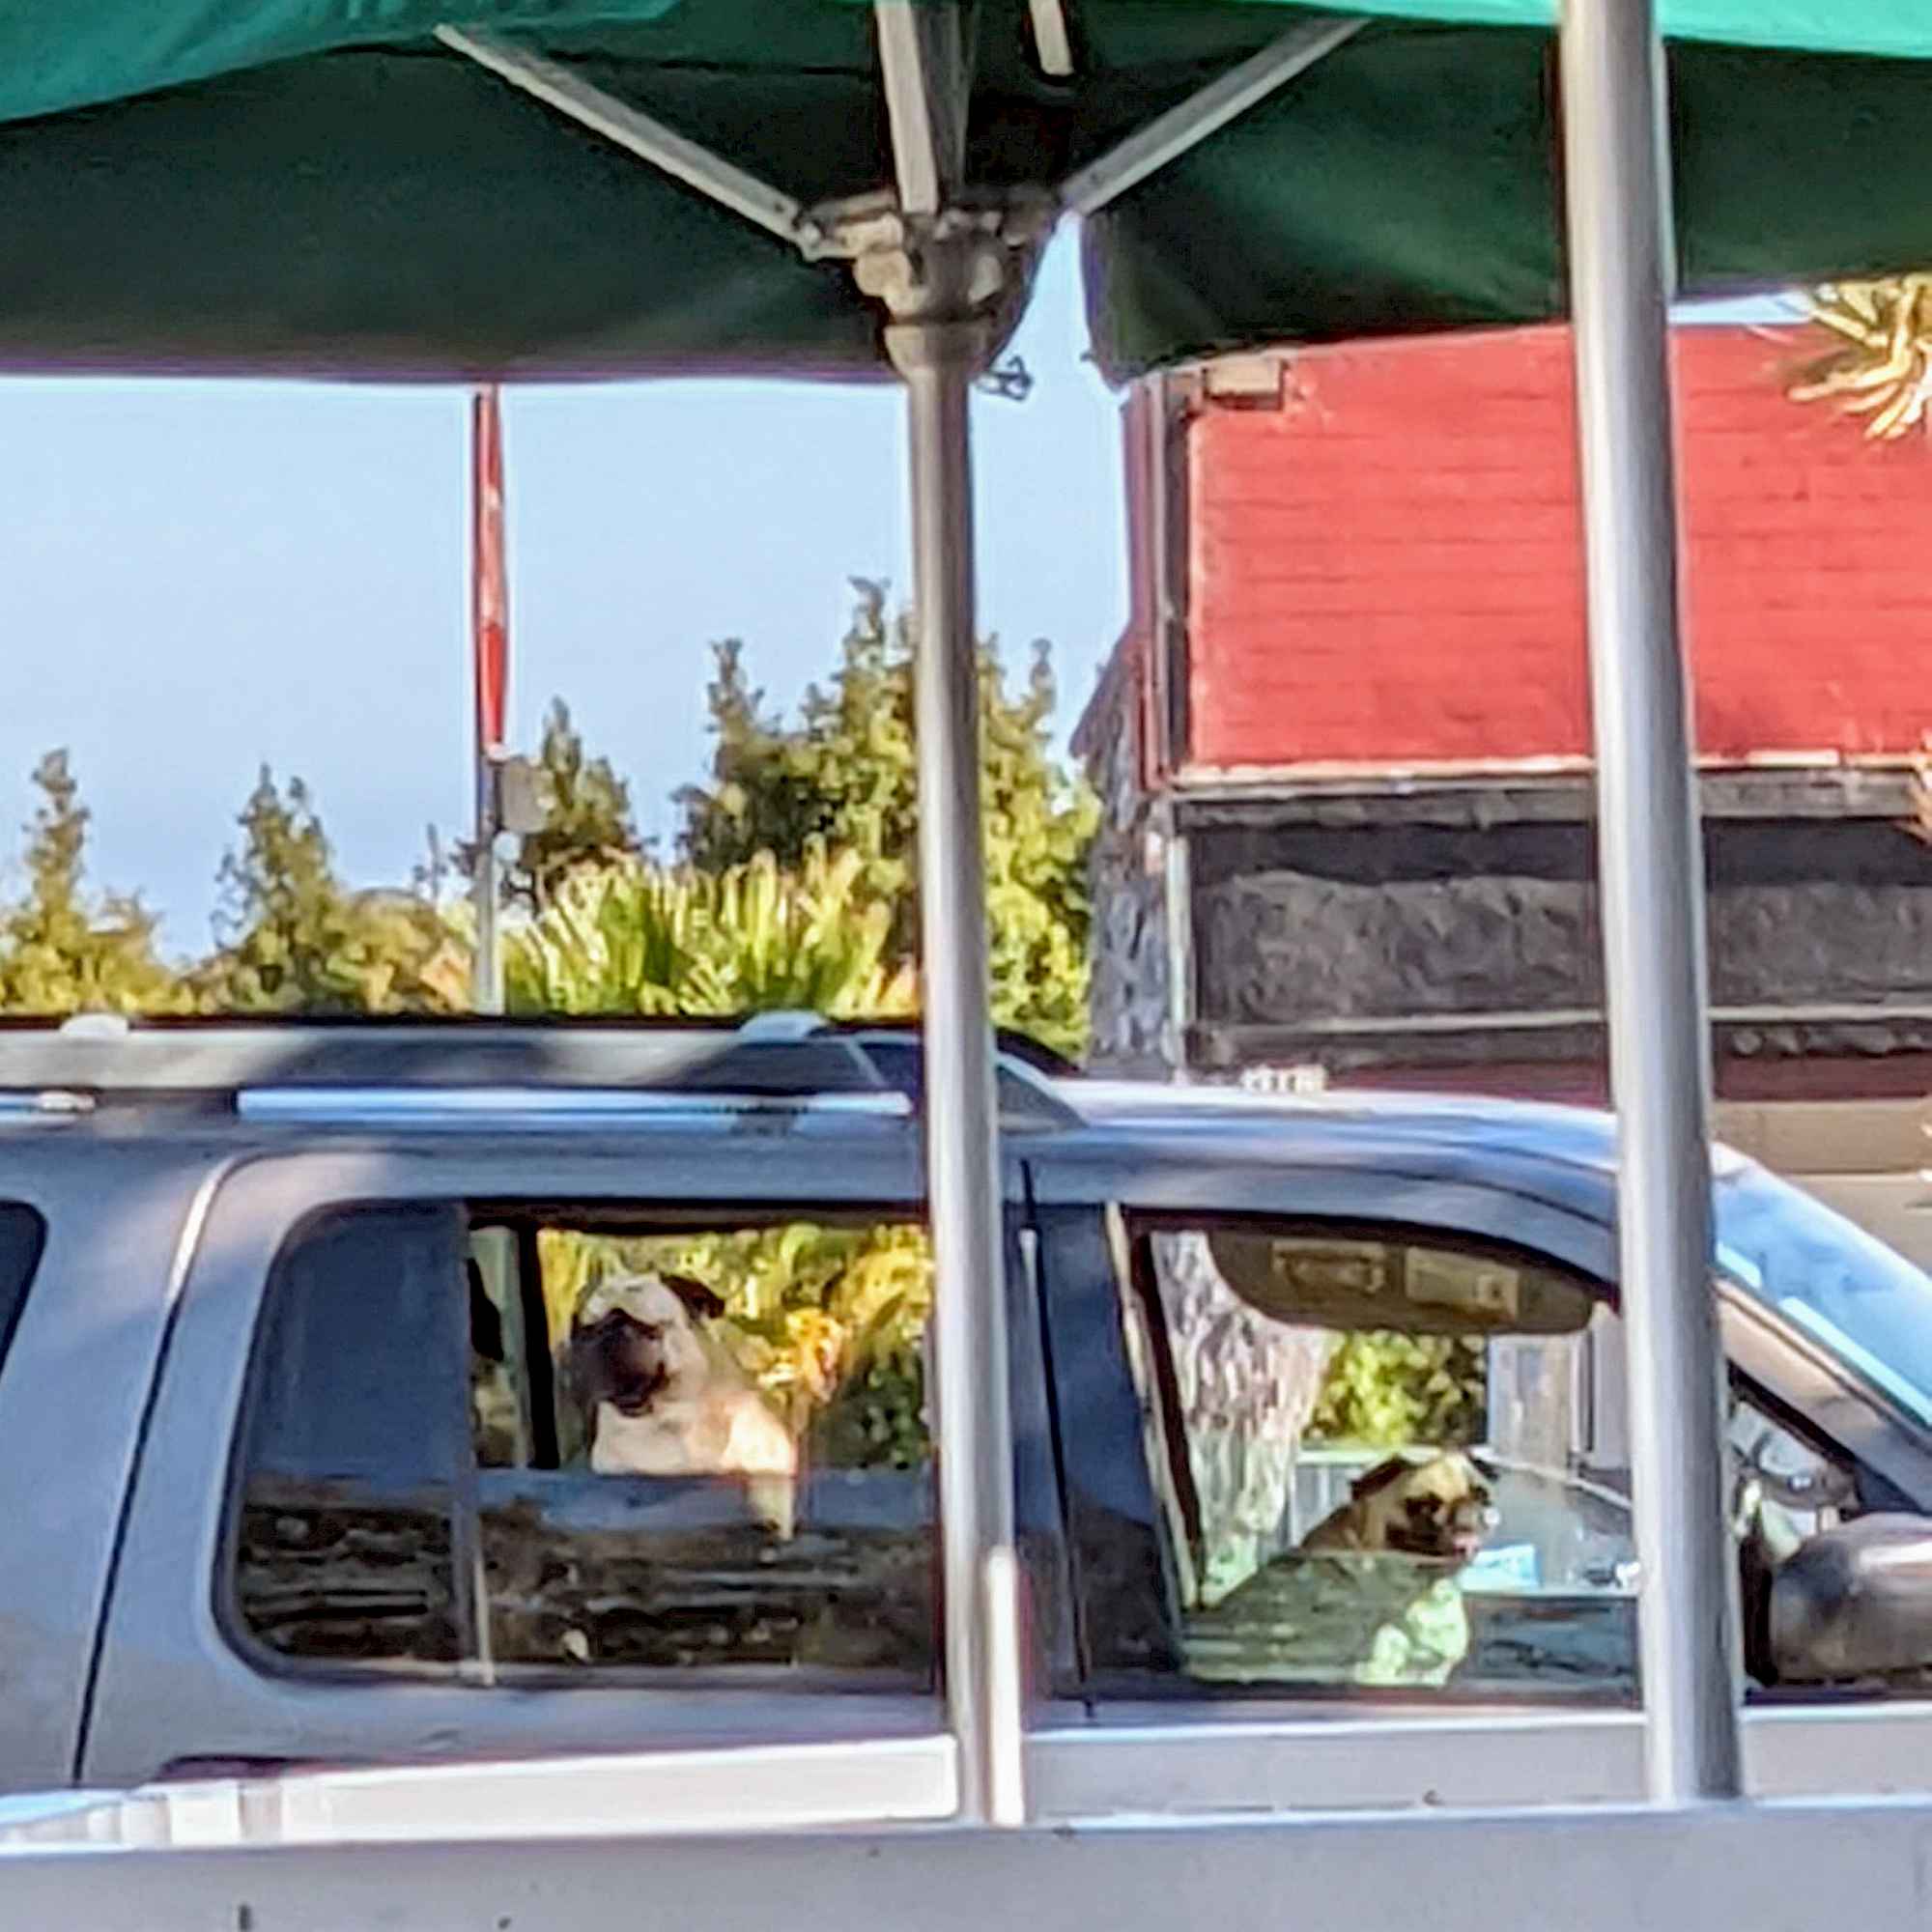 two pug dogs sitting in a car, one in the driver's seat, parked beside a Starbucks